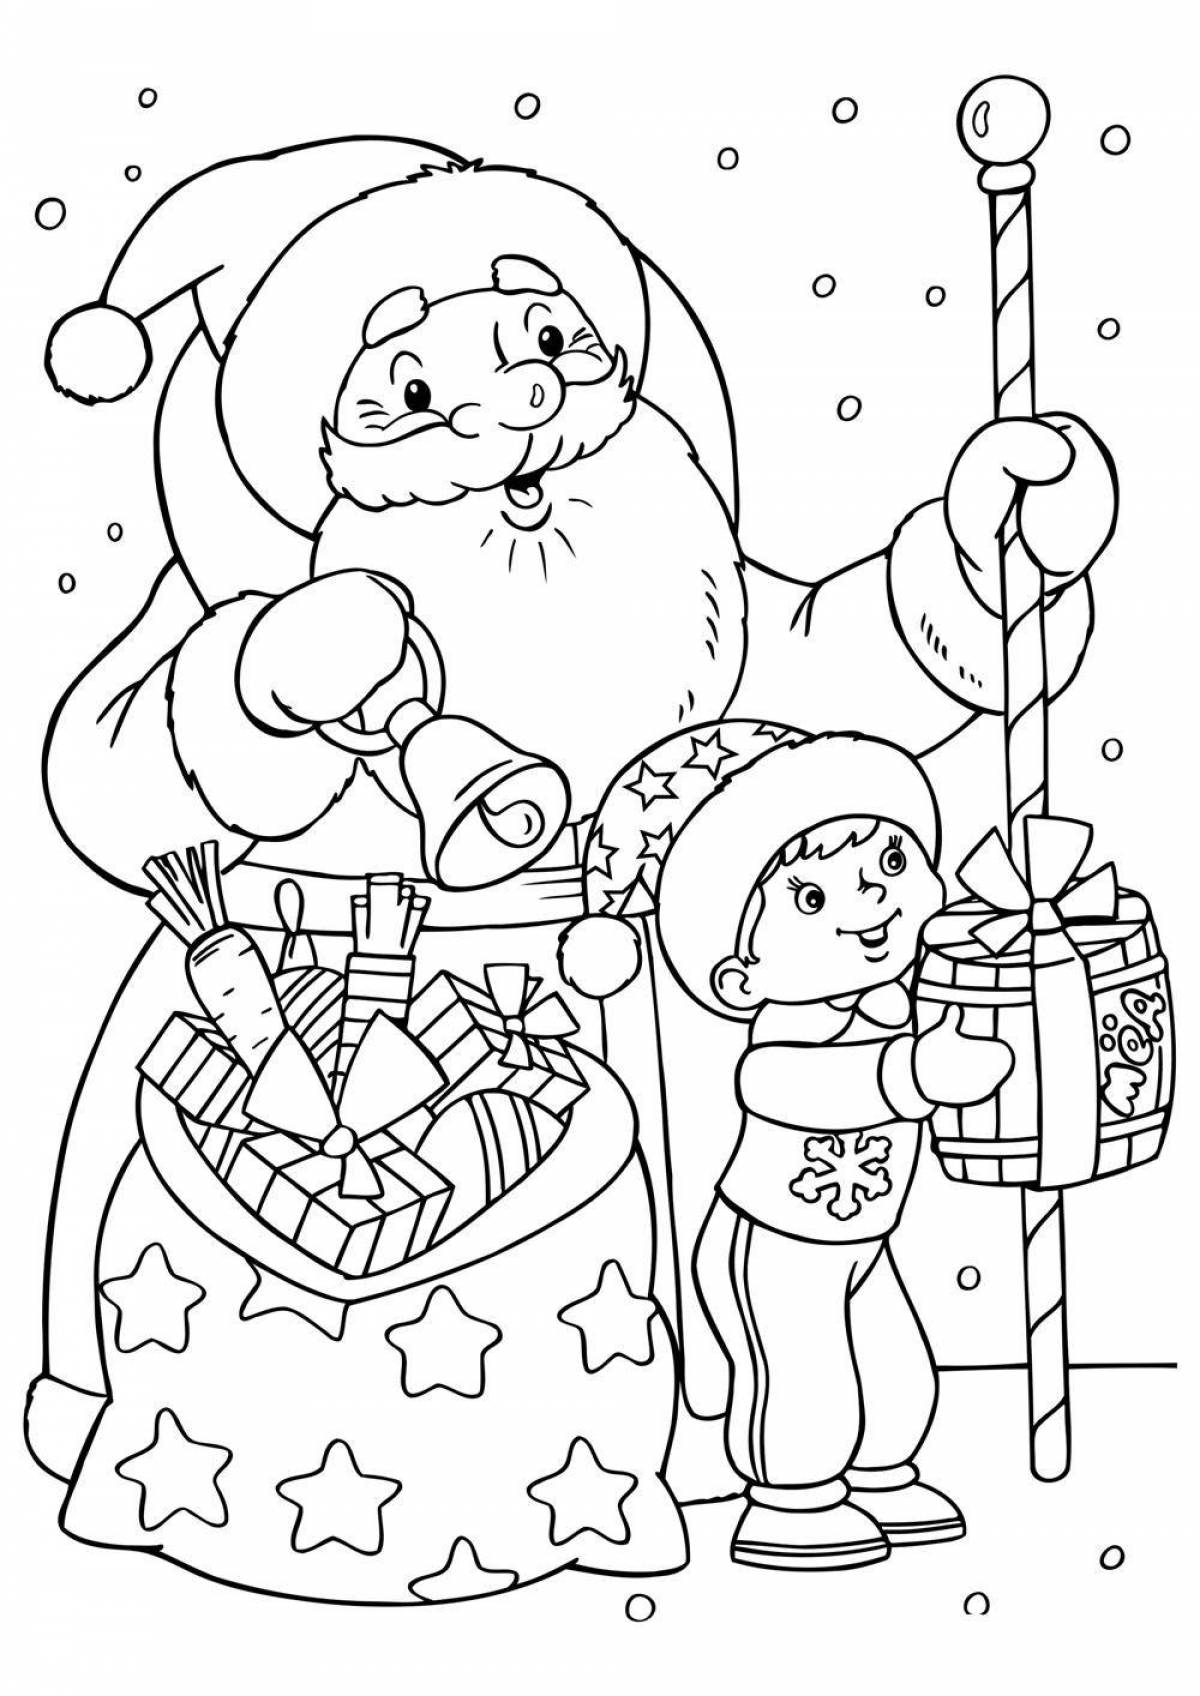 Glowing santa claus and animals coloring page